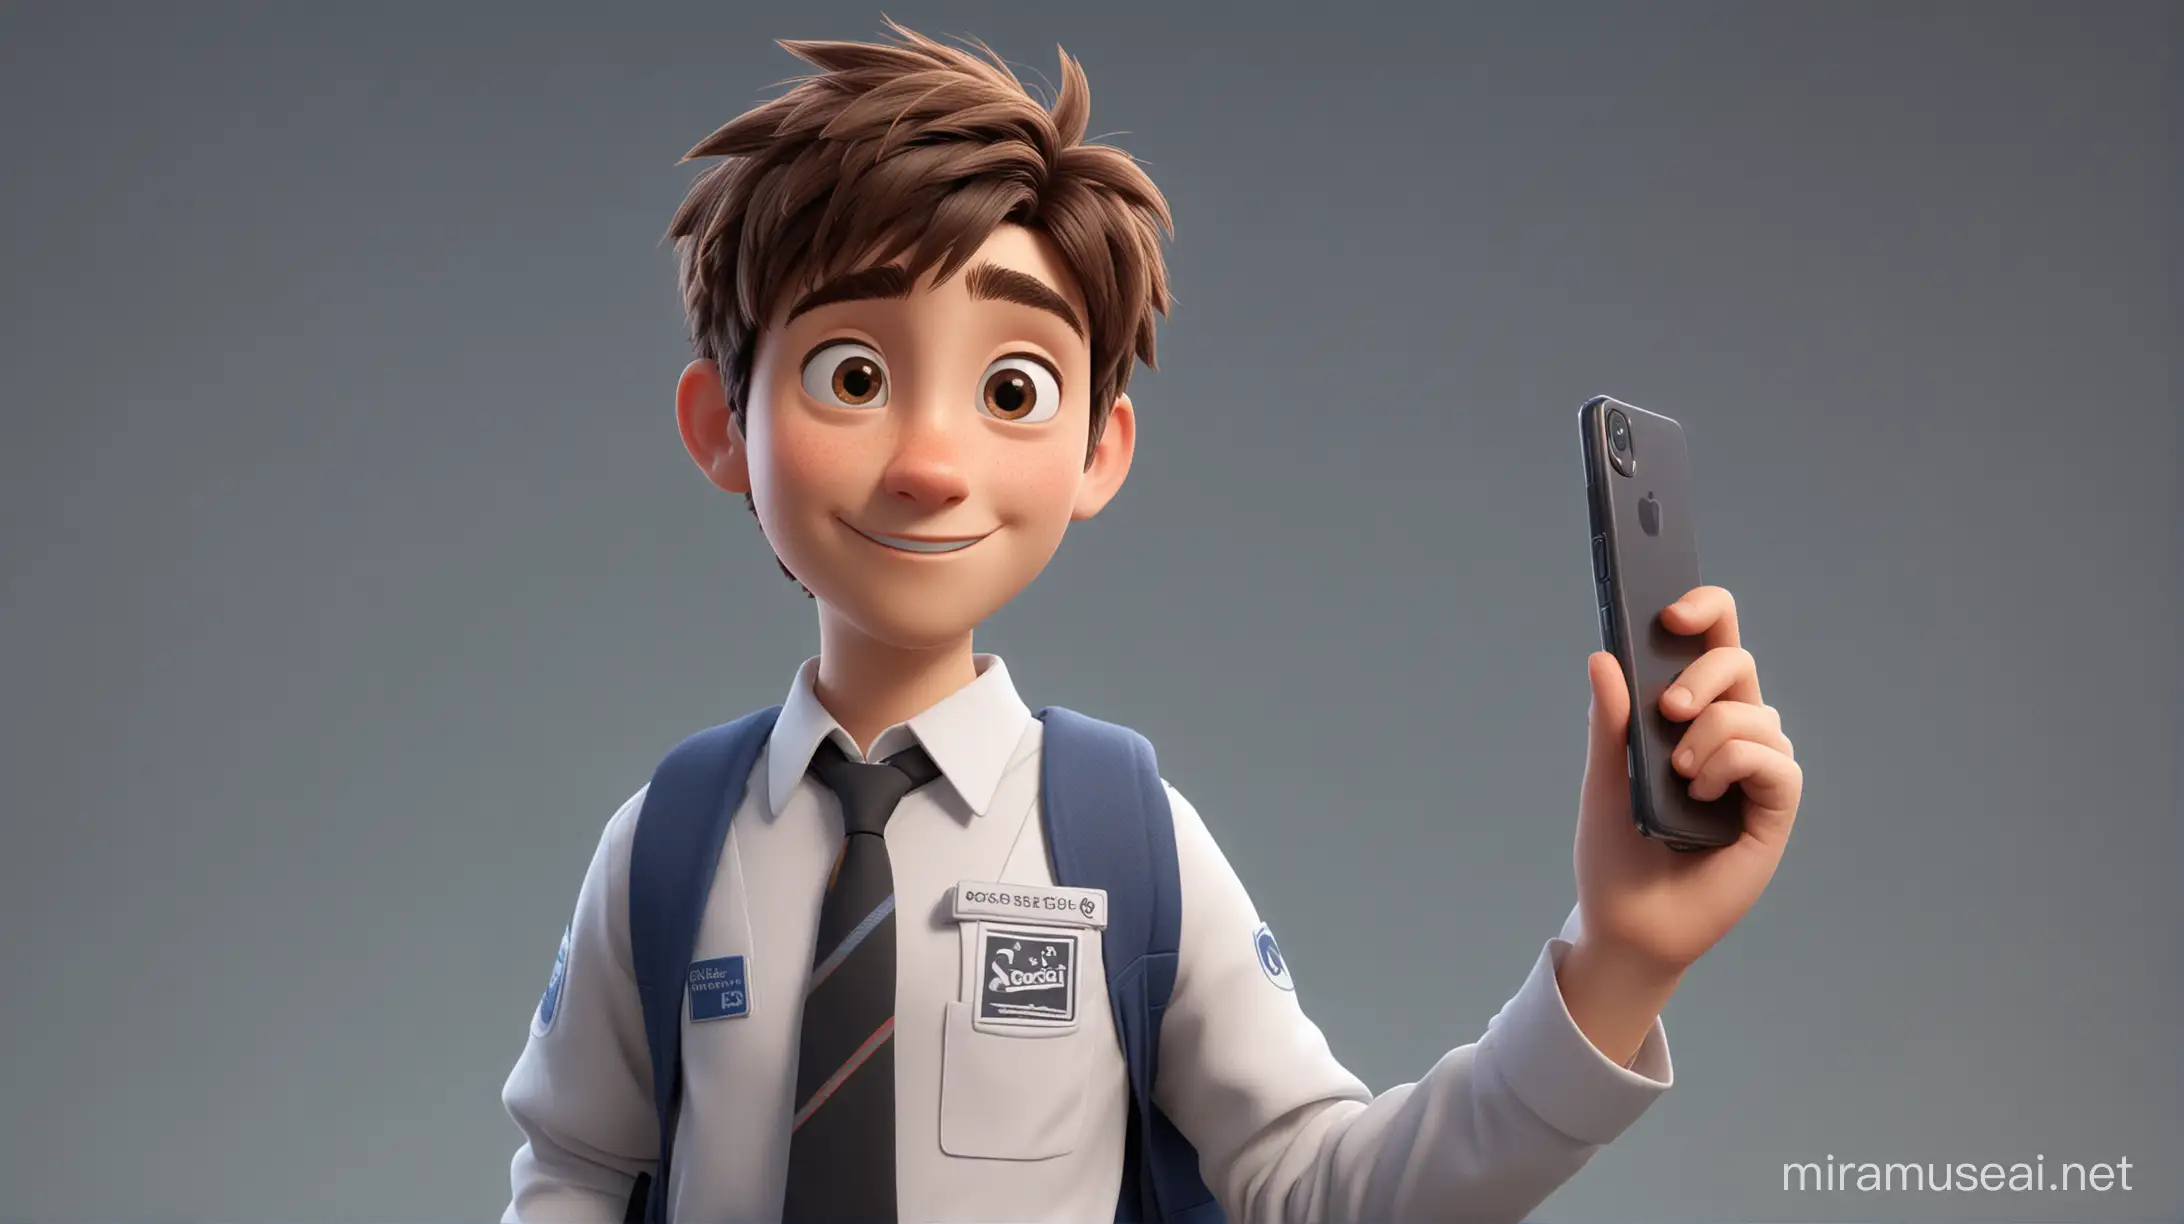  A 3D student character in school uniform working on a mobile phone and pointing to the right
Cinematics and Pixar